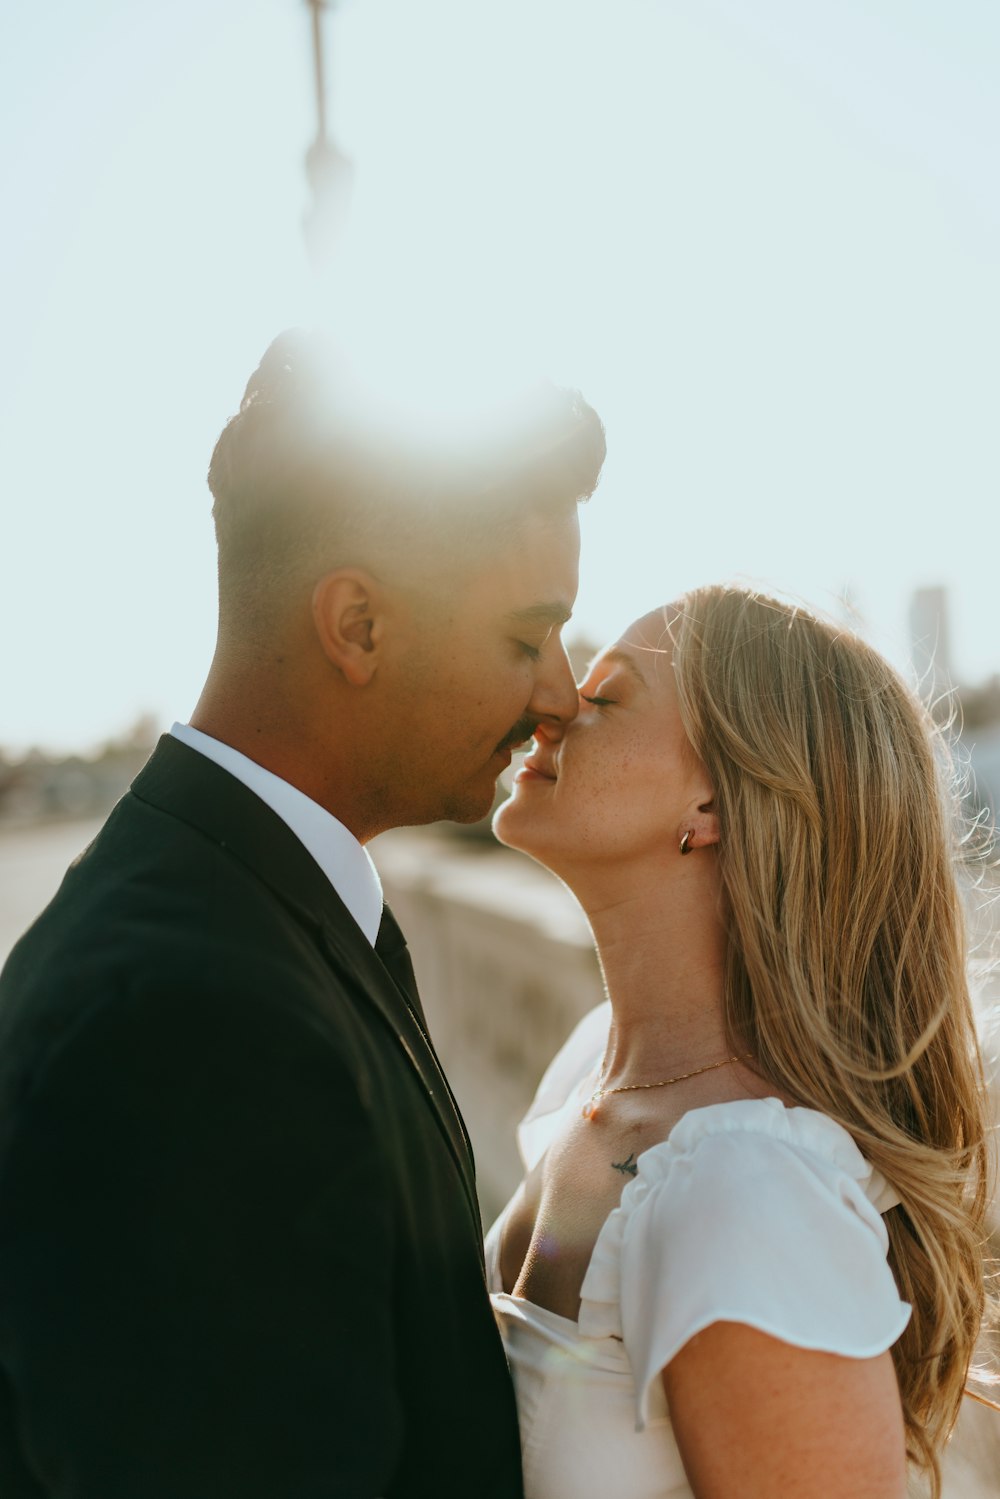 man in black suit kissing woman in white dress